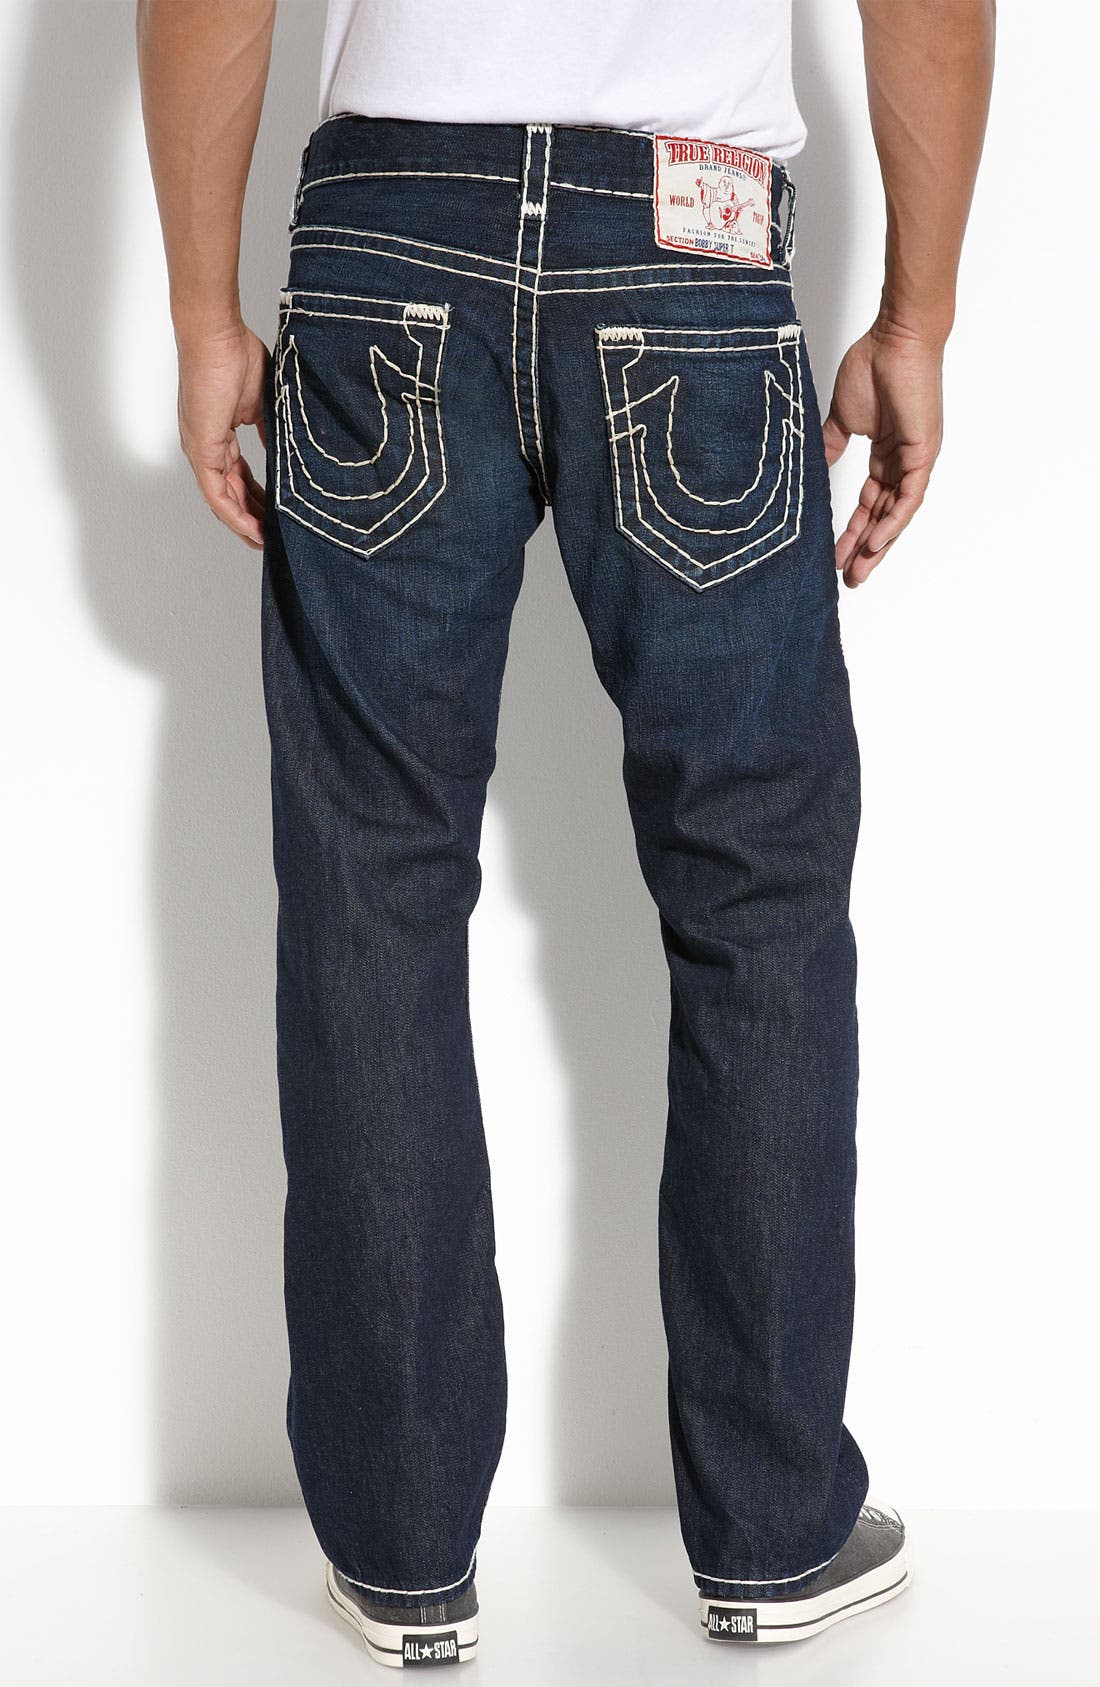 where can i sell my true religion jeans